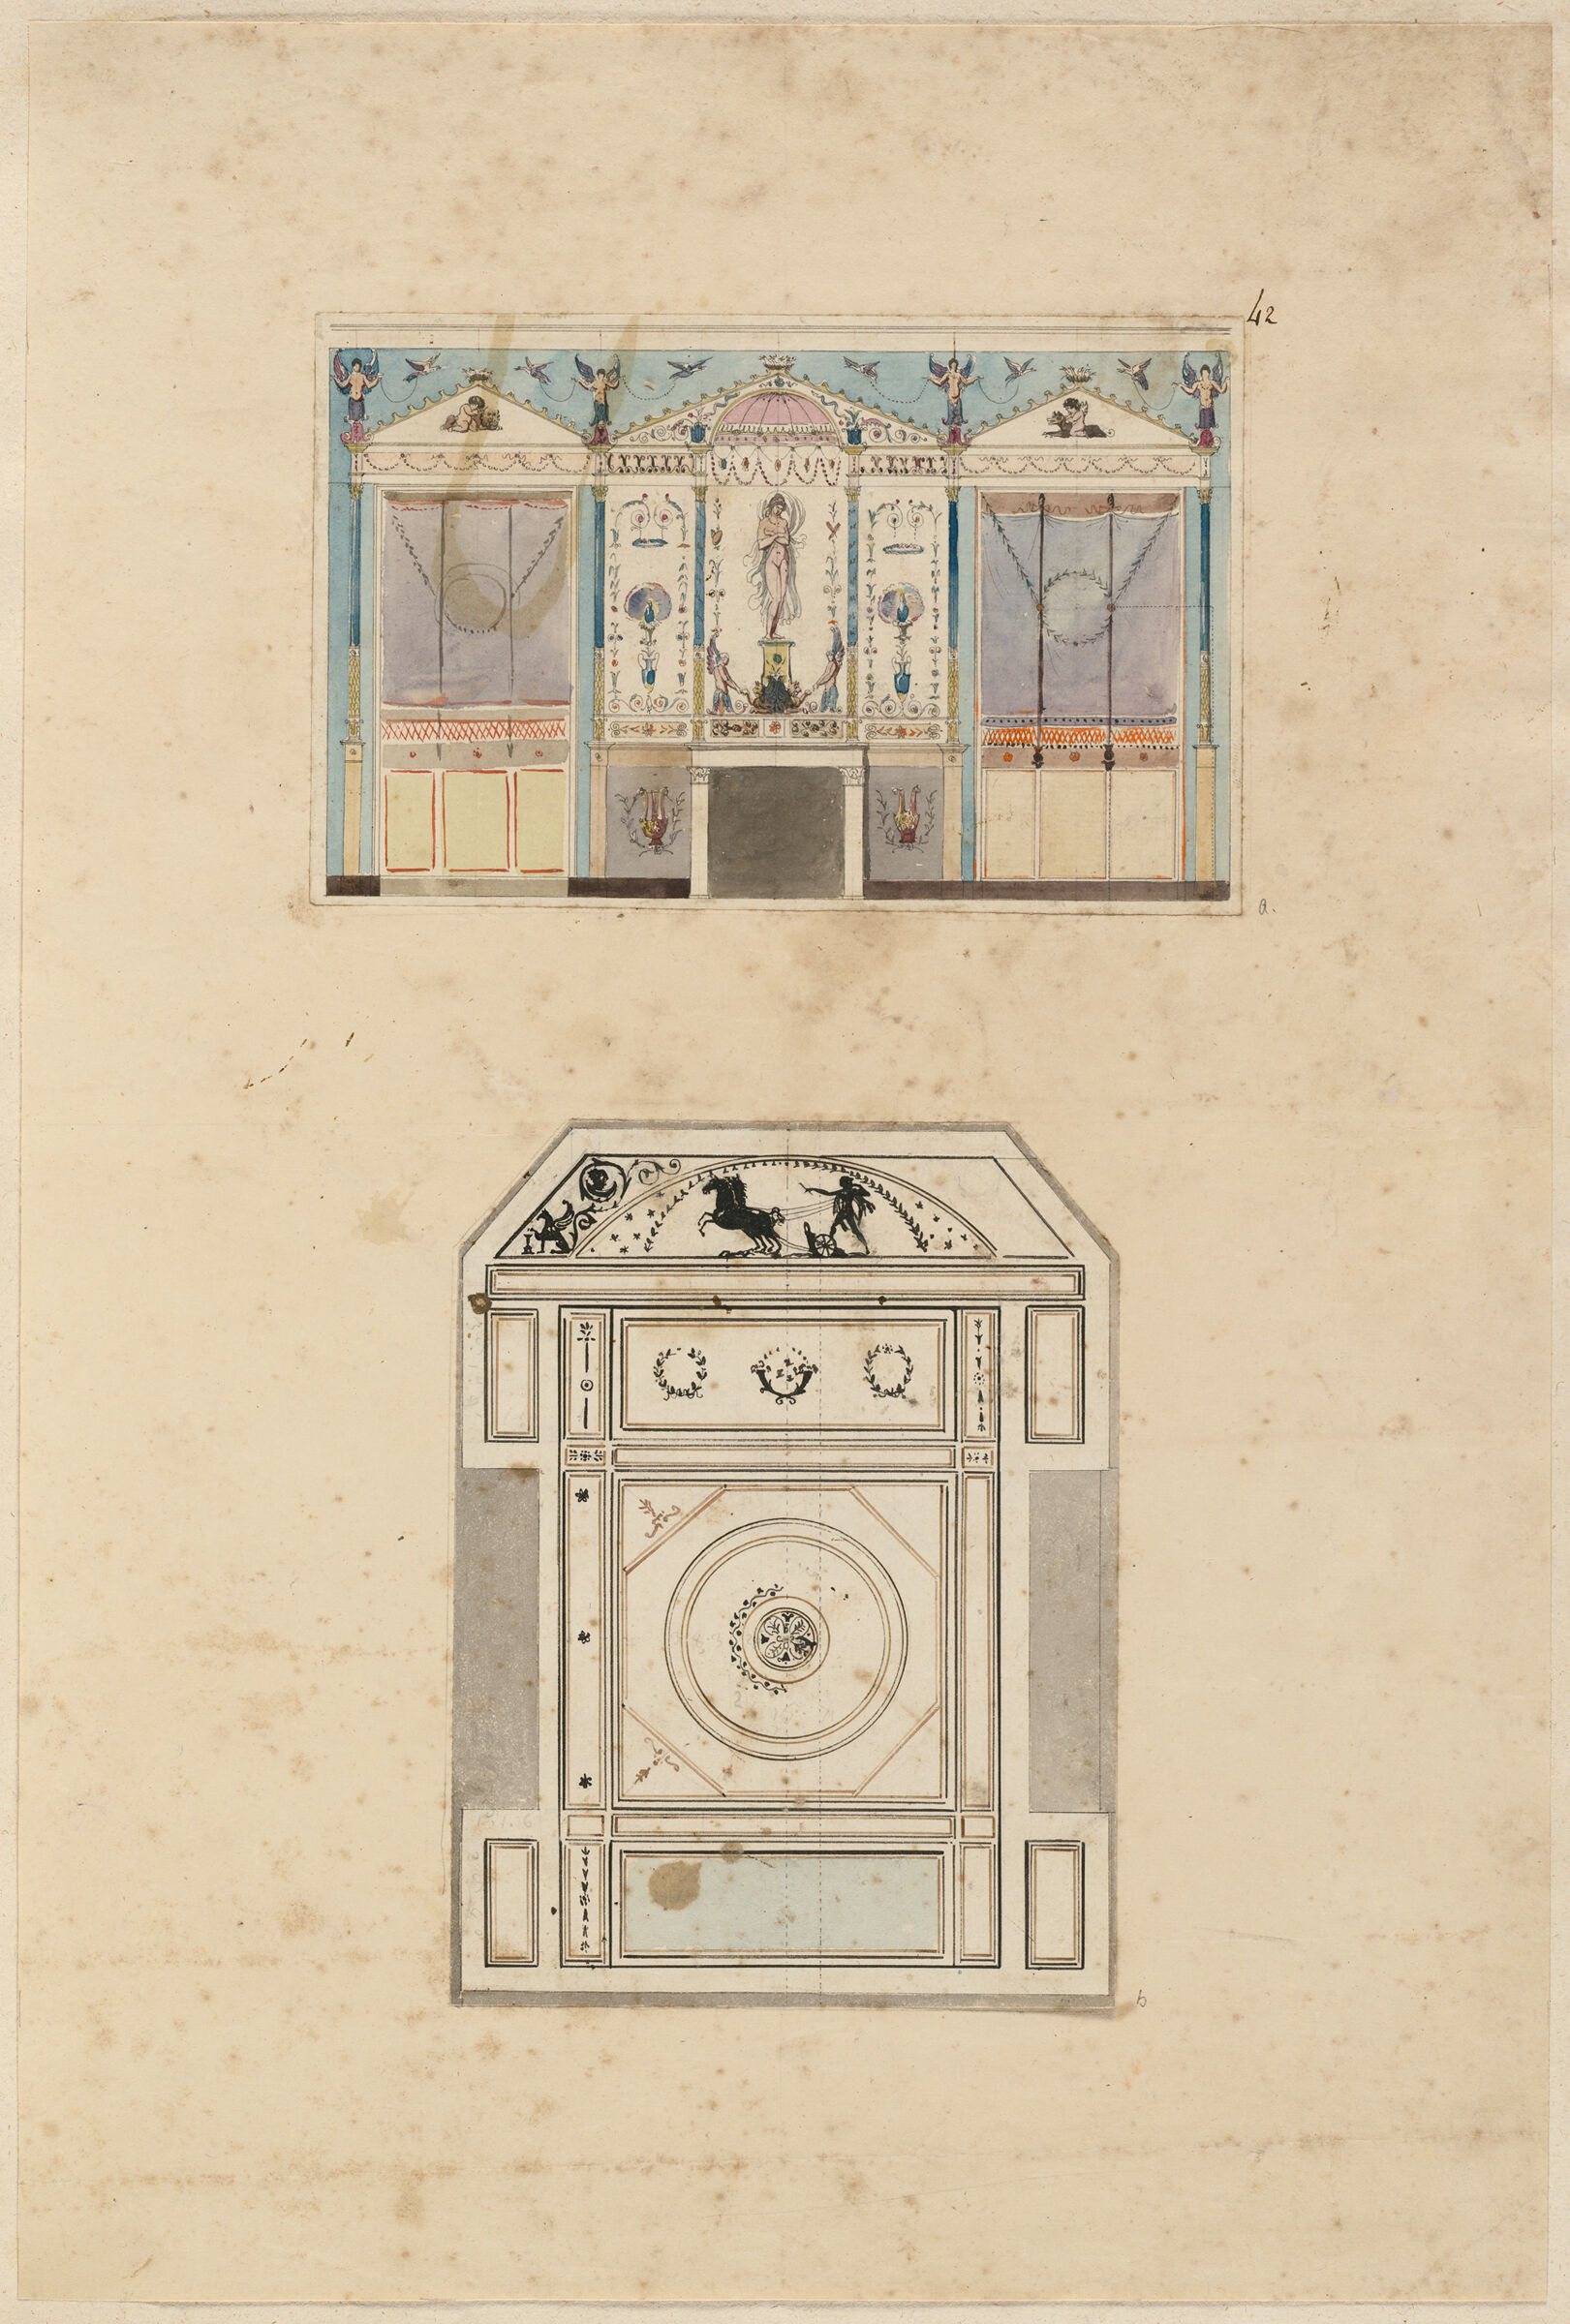 Elevation Of The Fireplace Wall Of A Boudoir